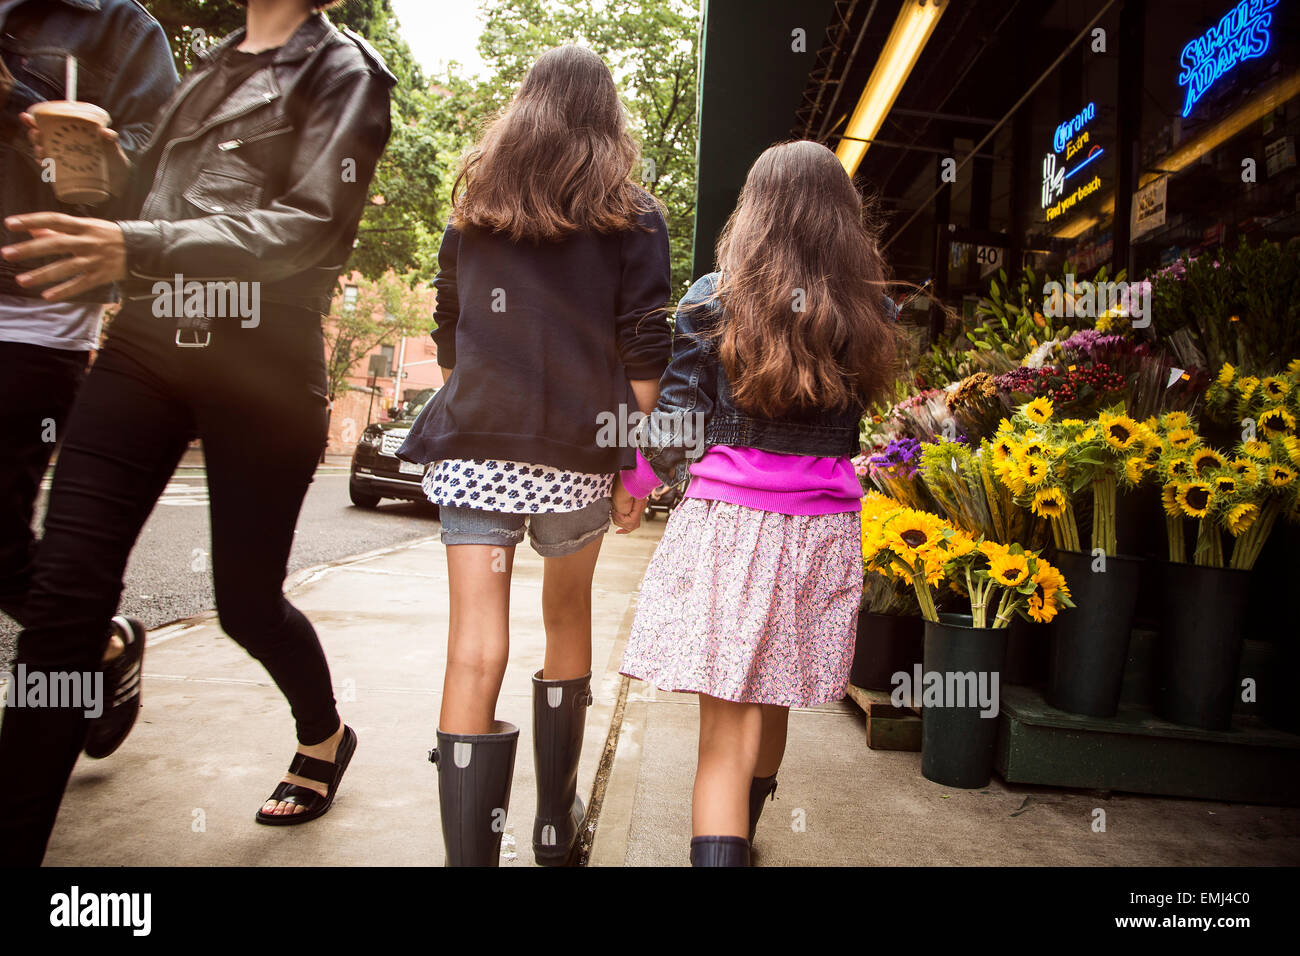 Two Young Girls Holding Hands While Walking Down Sidewalk Near Flower Stand, Rear View, New York City, USA Stock Photo